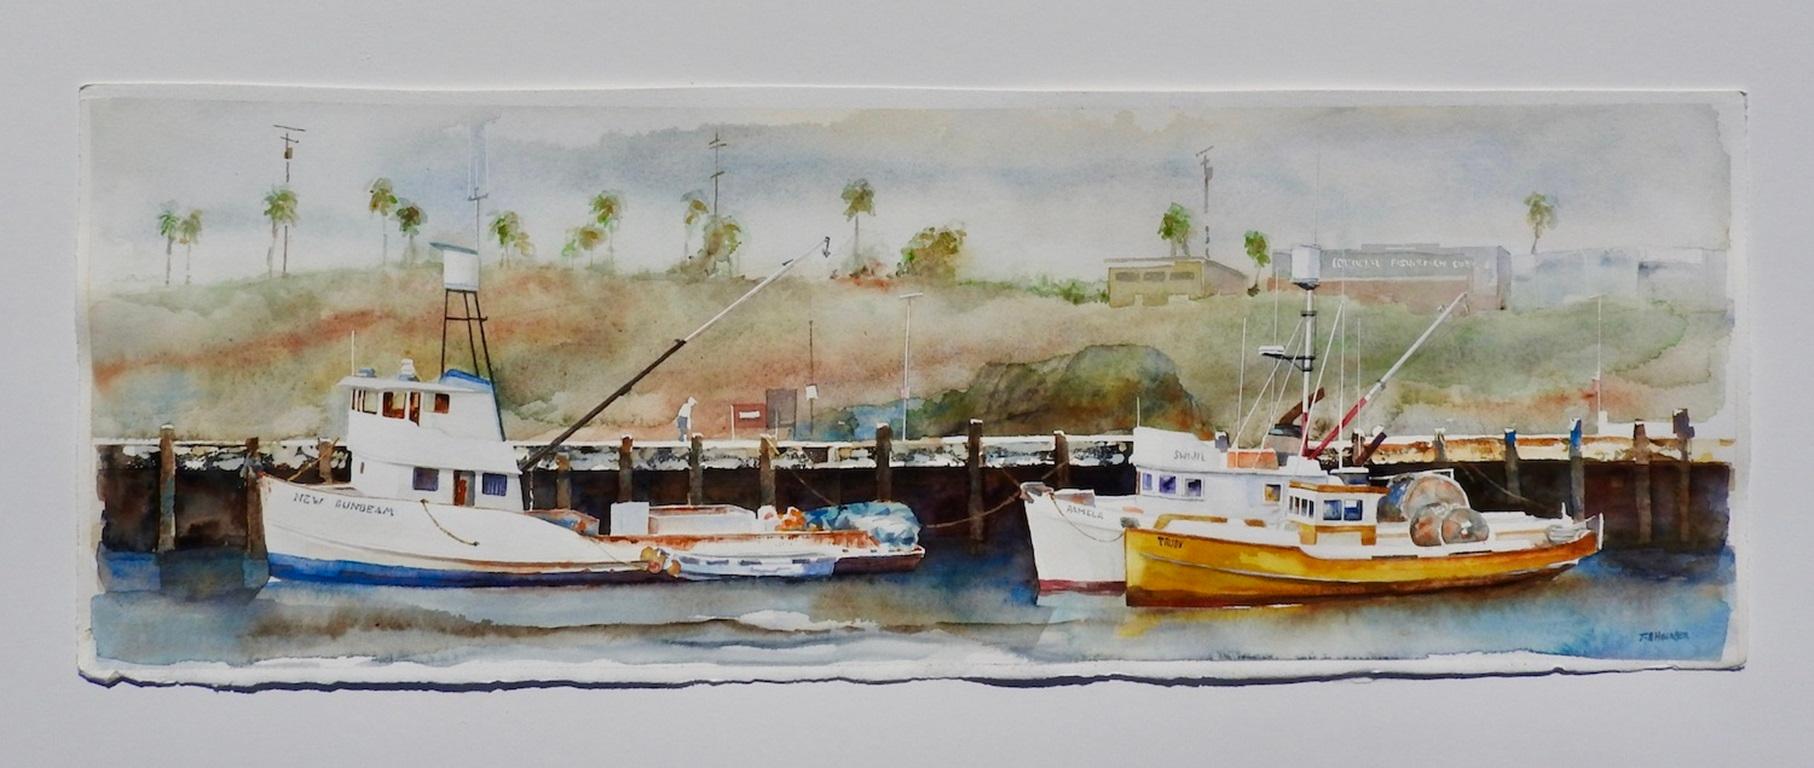 <p>Artist Comments<br>The fishing boats in San Pedro are rich in historical color. They are passed down from generation to generation. The painting draws attention to the foreground while providing a glimpse of the storage facilities and palm trees